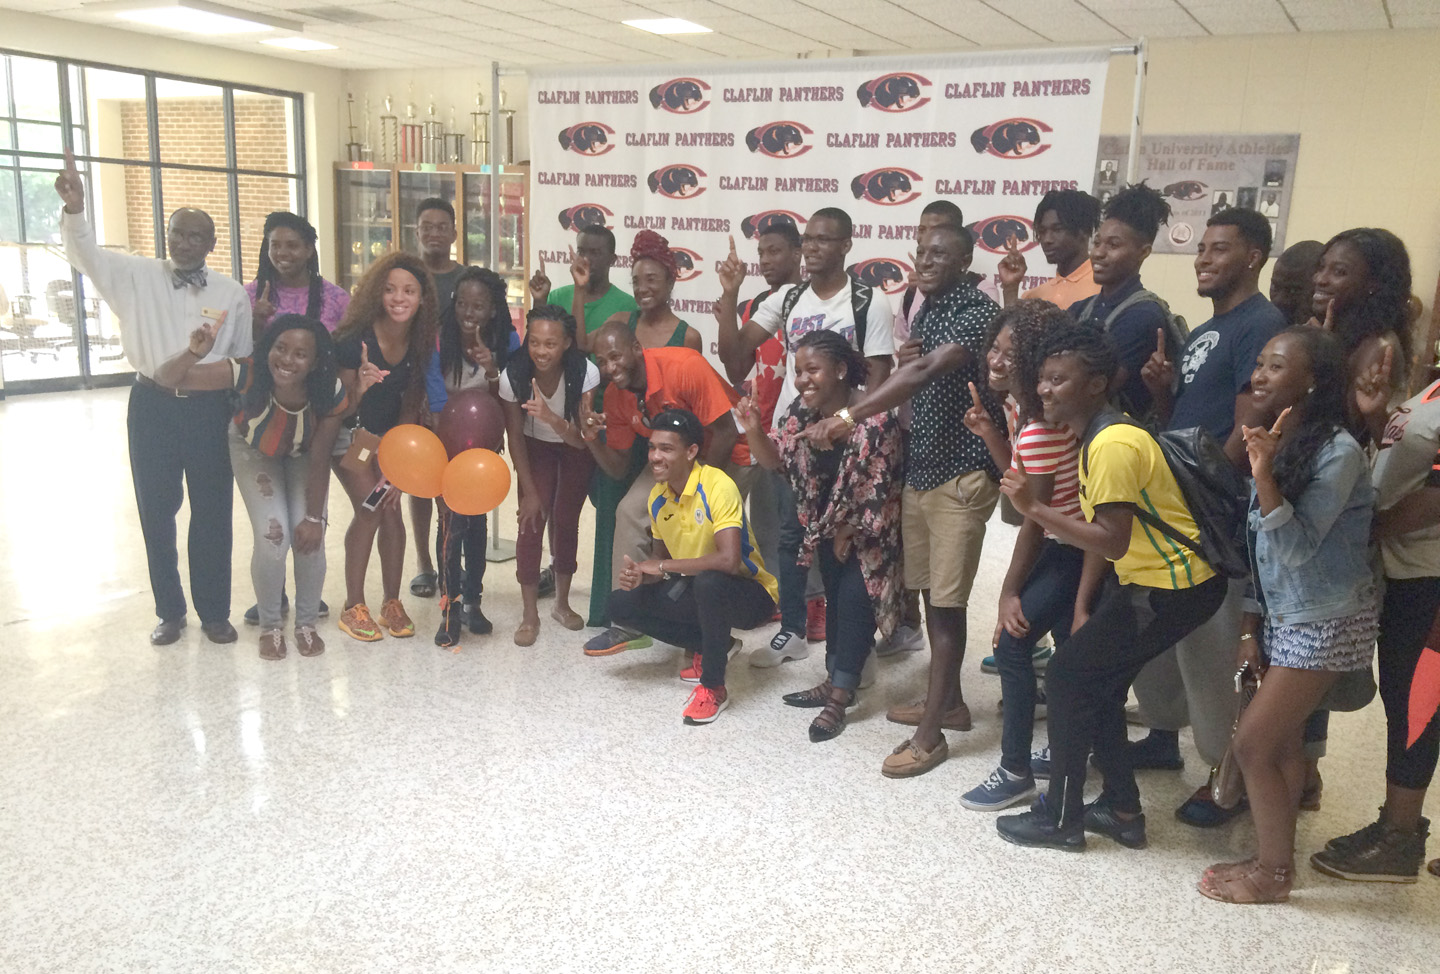 Brandon Valentine-Parris Poses with other Claflin Students